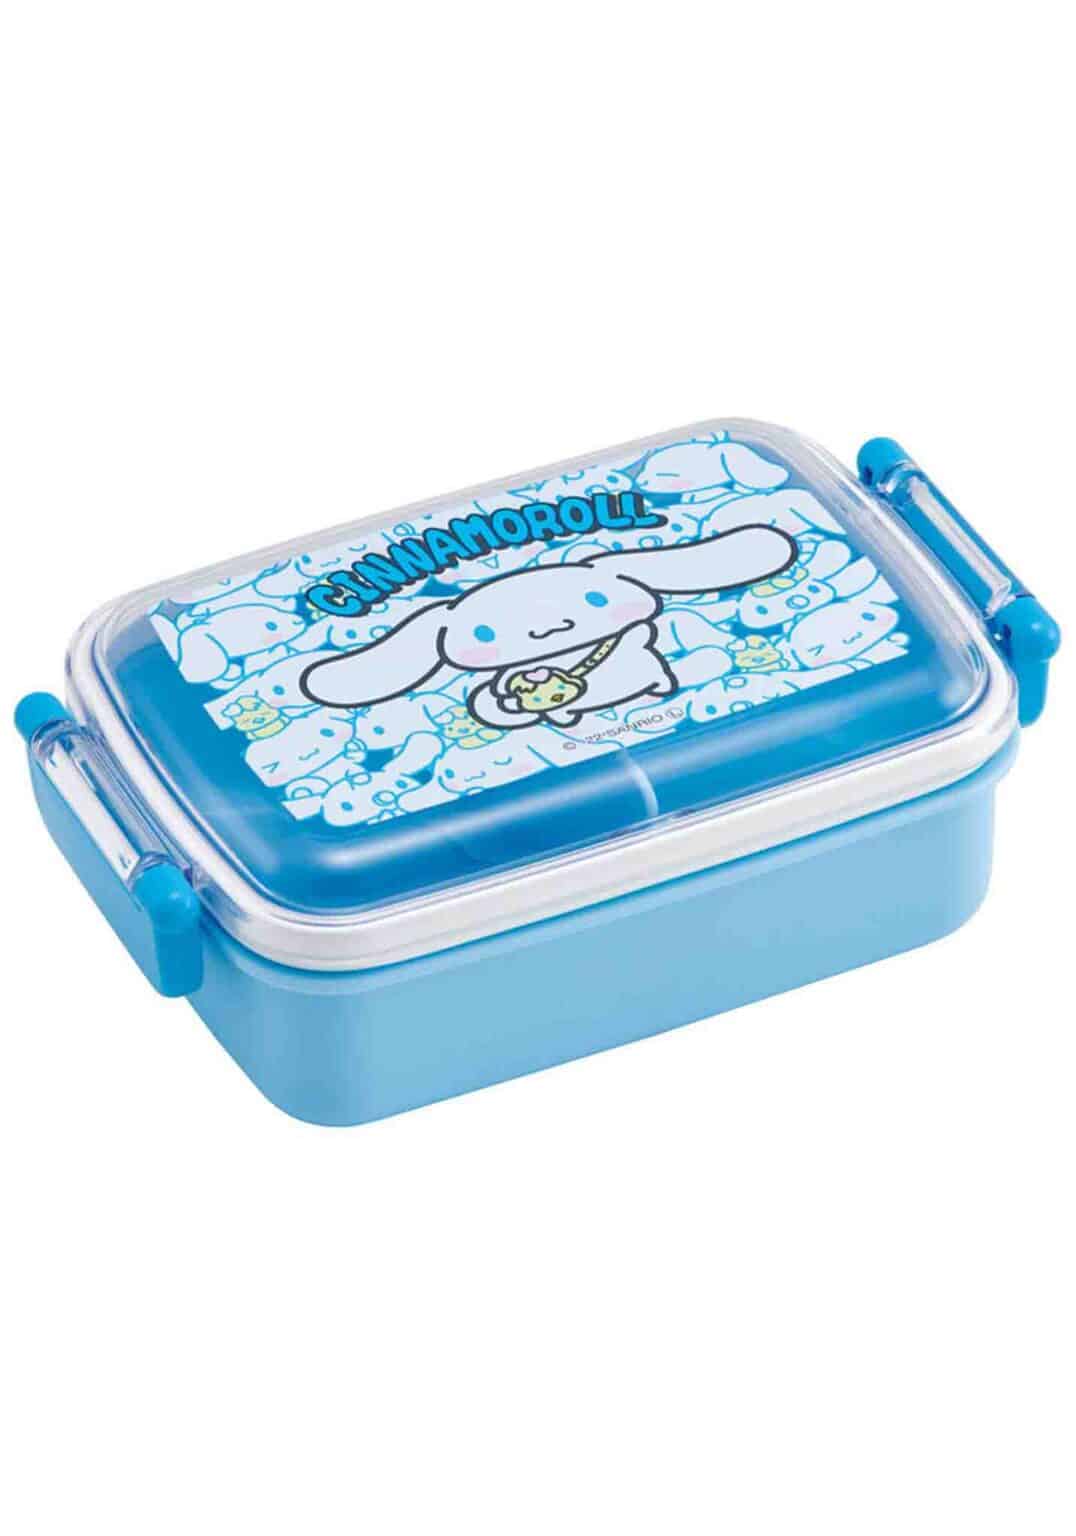 Clever Idiots Cinnamoroll Friends Bento Lunch Box Kawaii Gifts 4973307600463